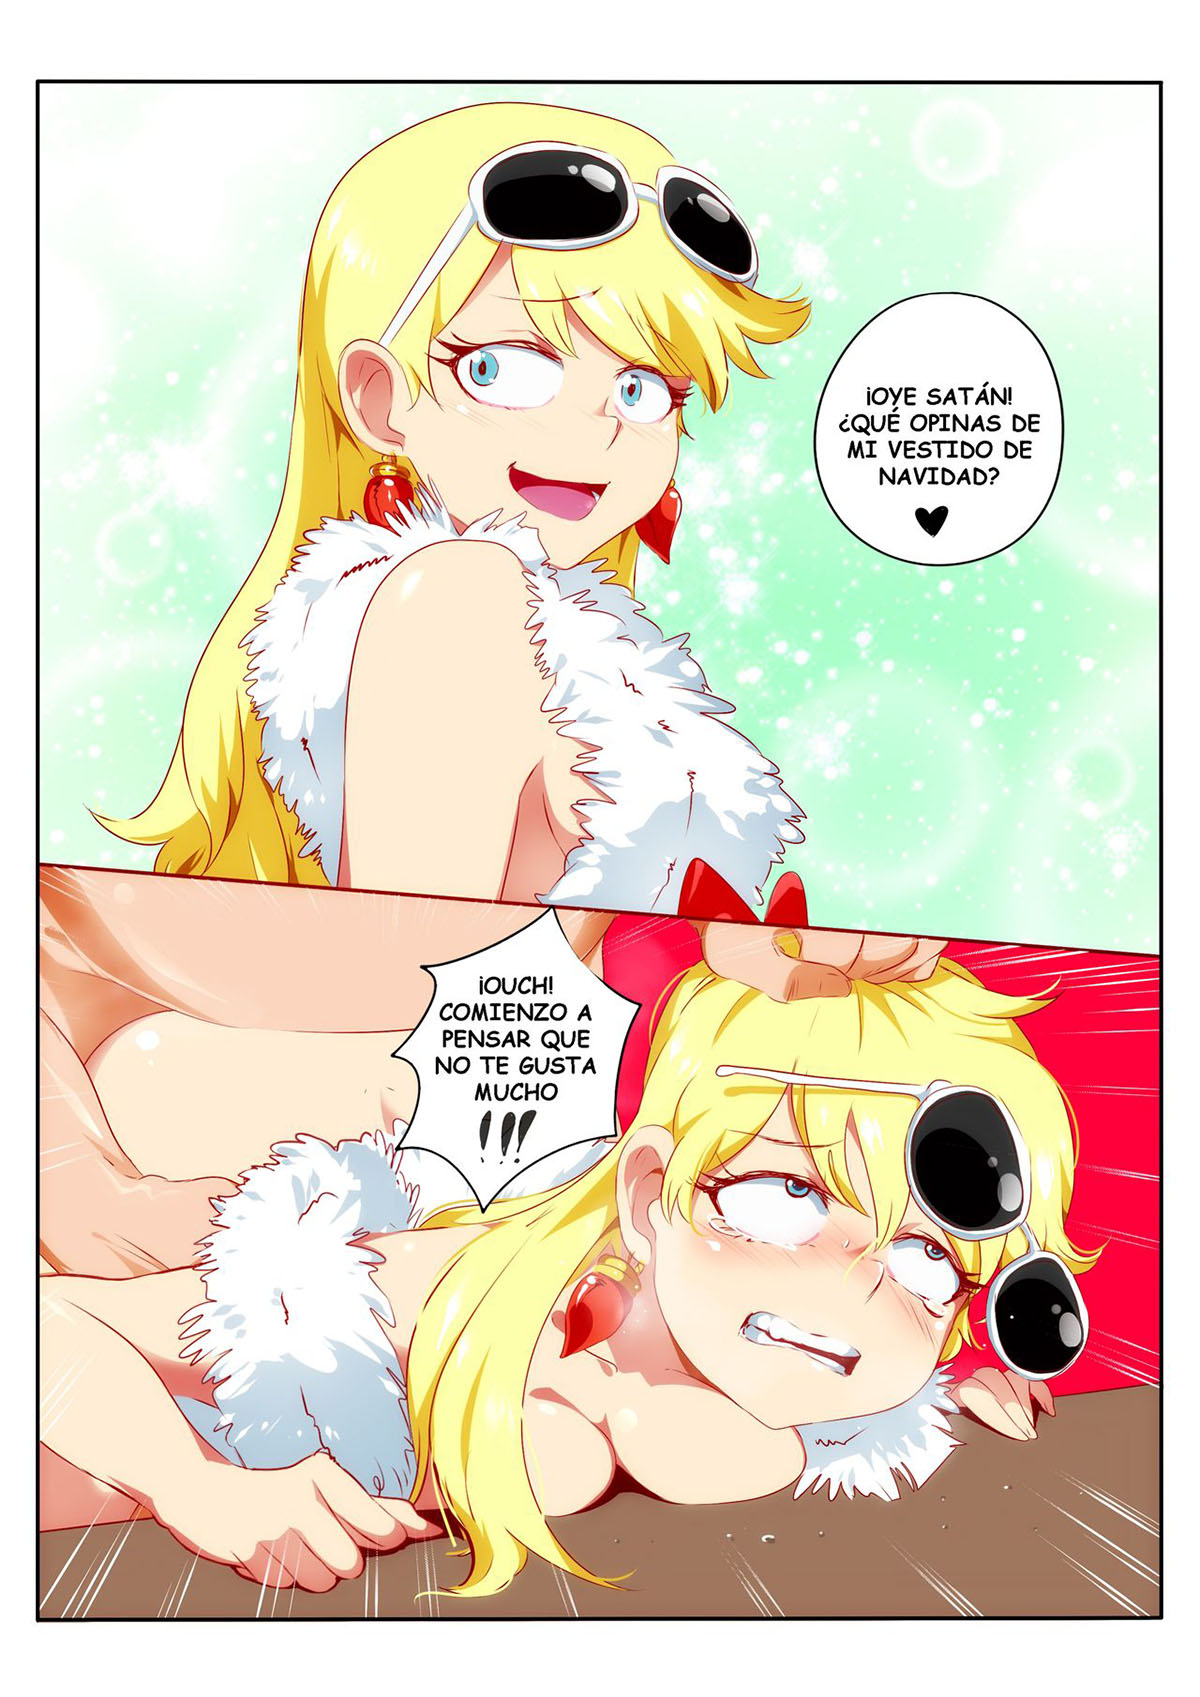 The LEWD HOUSE 2.5 - Christmas Gifts